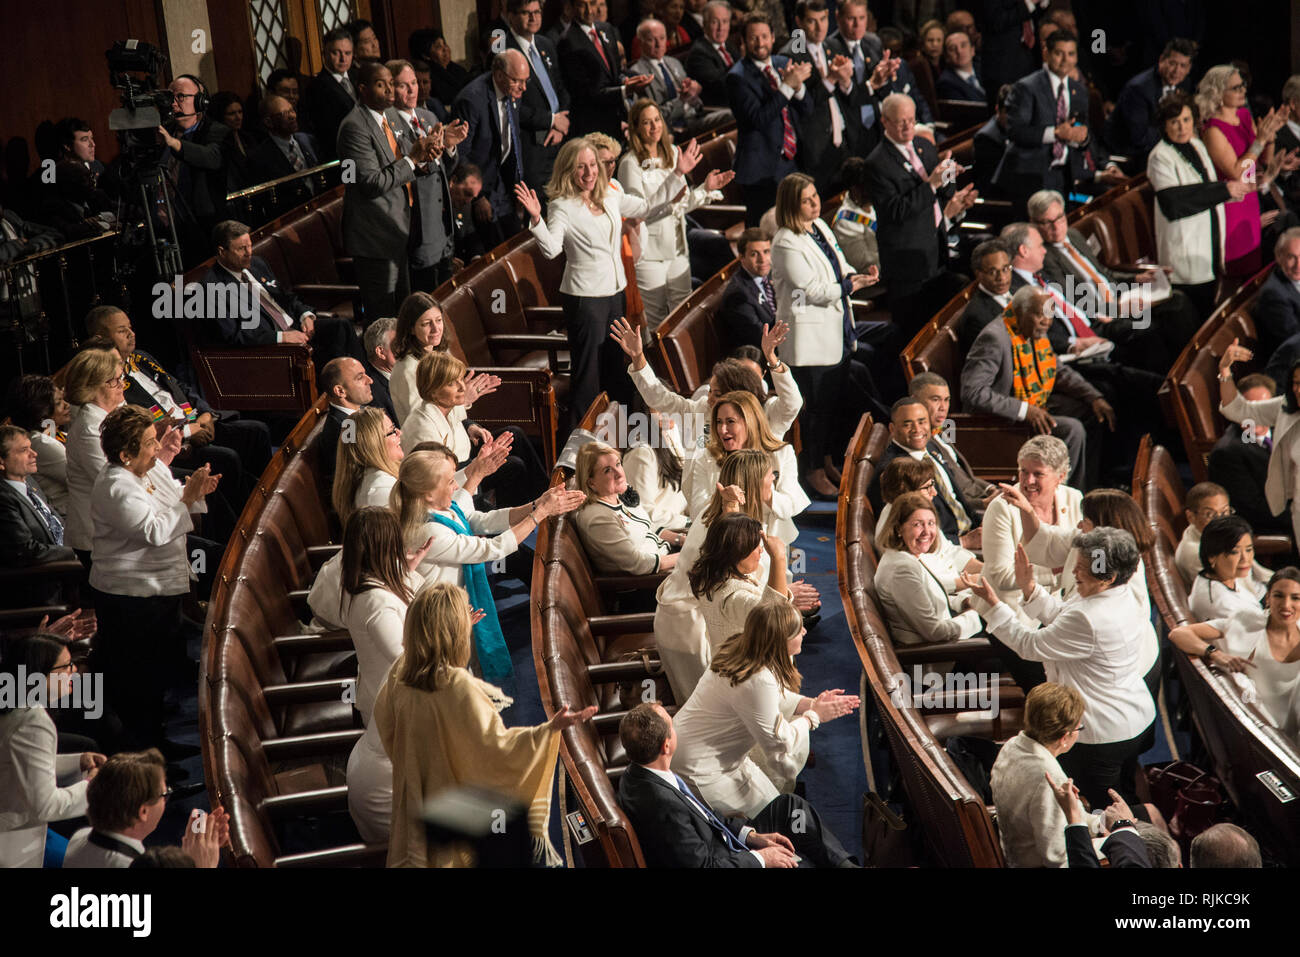 Washington, USA. 05th Feb, 2019. Washington DC, February 5, 2019, USA: Women Congressional Representatives cheer as President Trump congradulated them on their victory. President Donald J Trump gives his second State of the Union (SOTU) address as President. House Speaker Nancy Pelosi and Vice President Mike Pence sit behind him in the US Capitol House of Representatives. Credit: Patsy Lynch/Alamy Live News Stock Photo